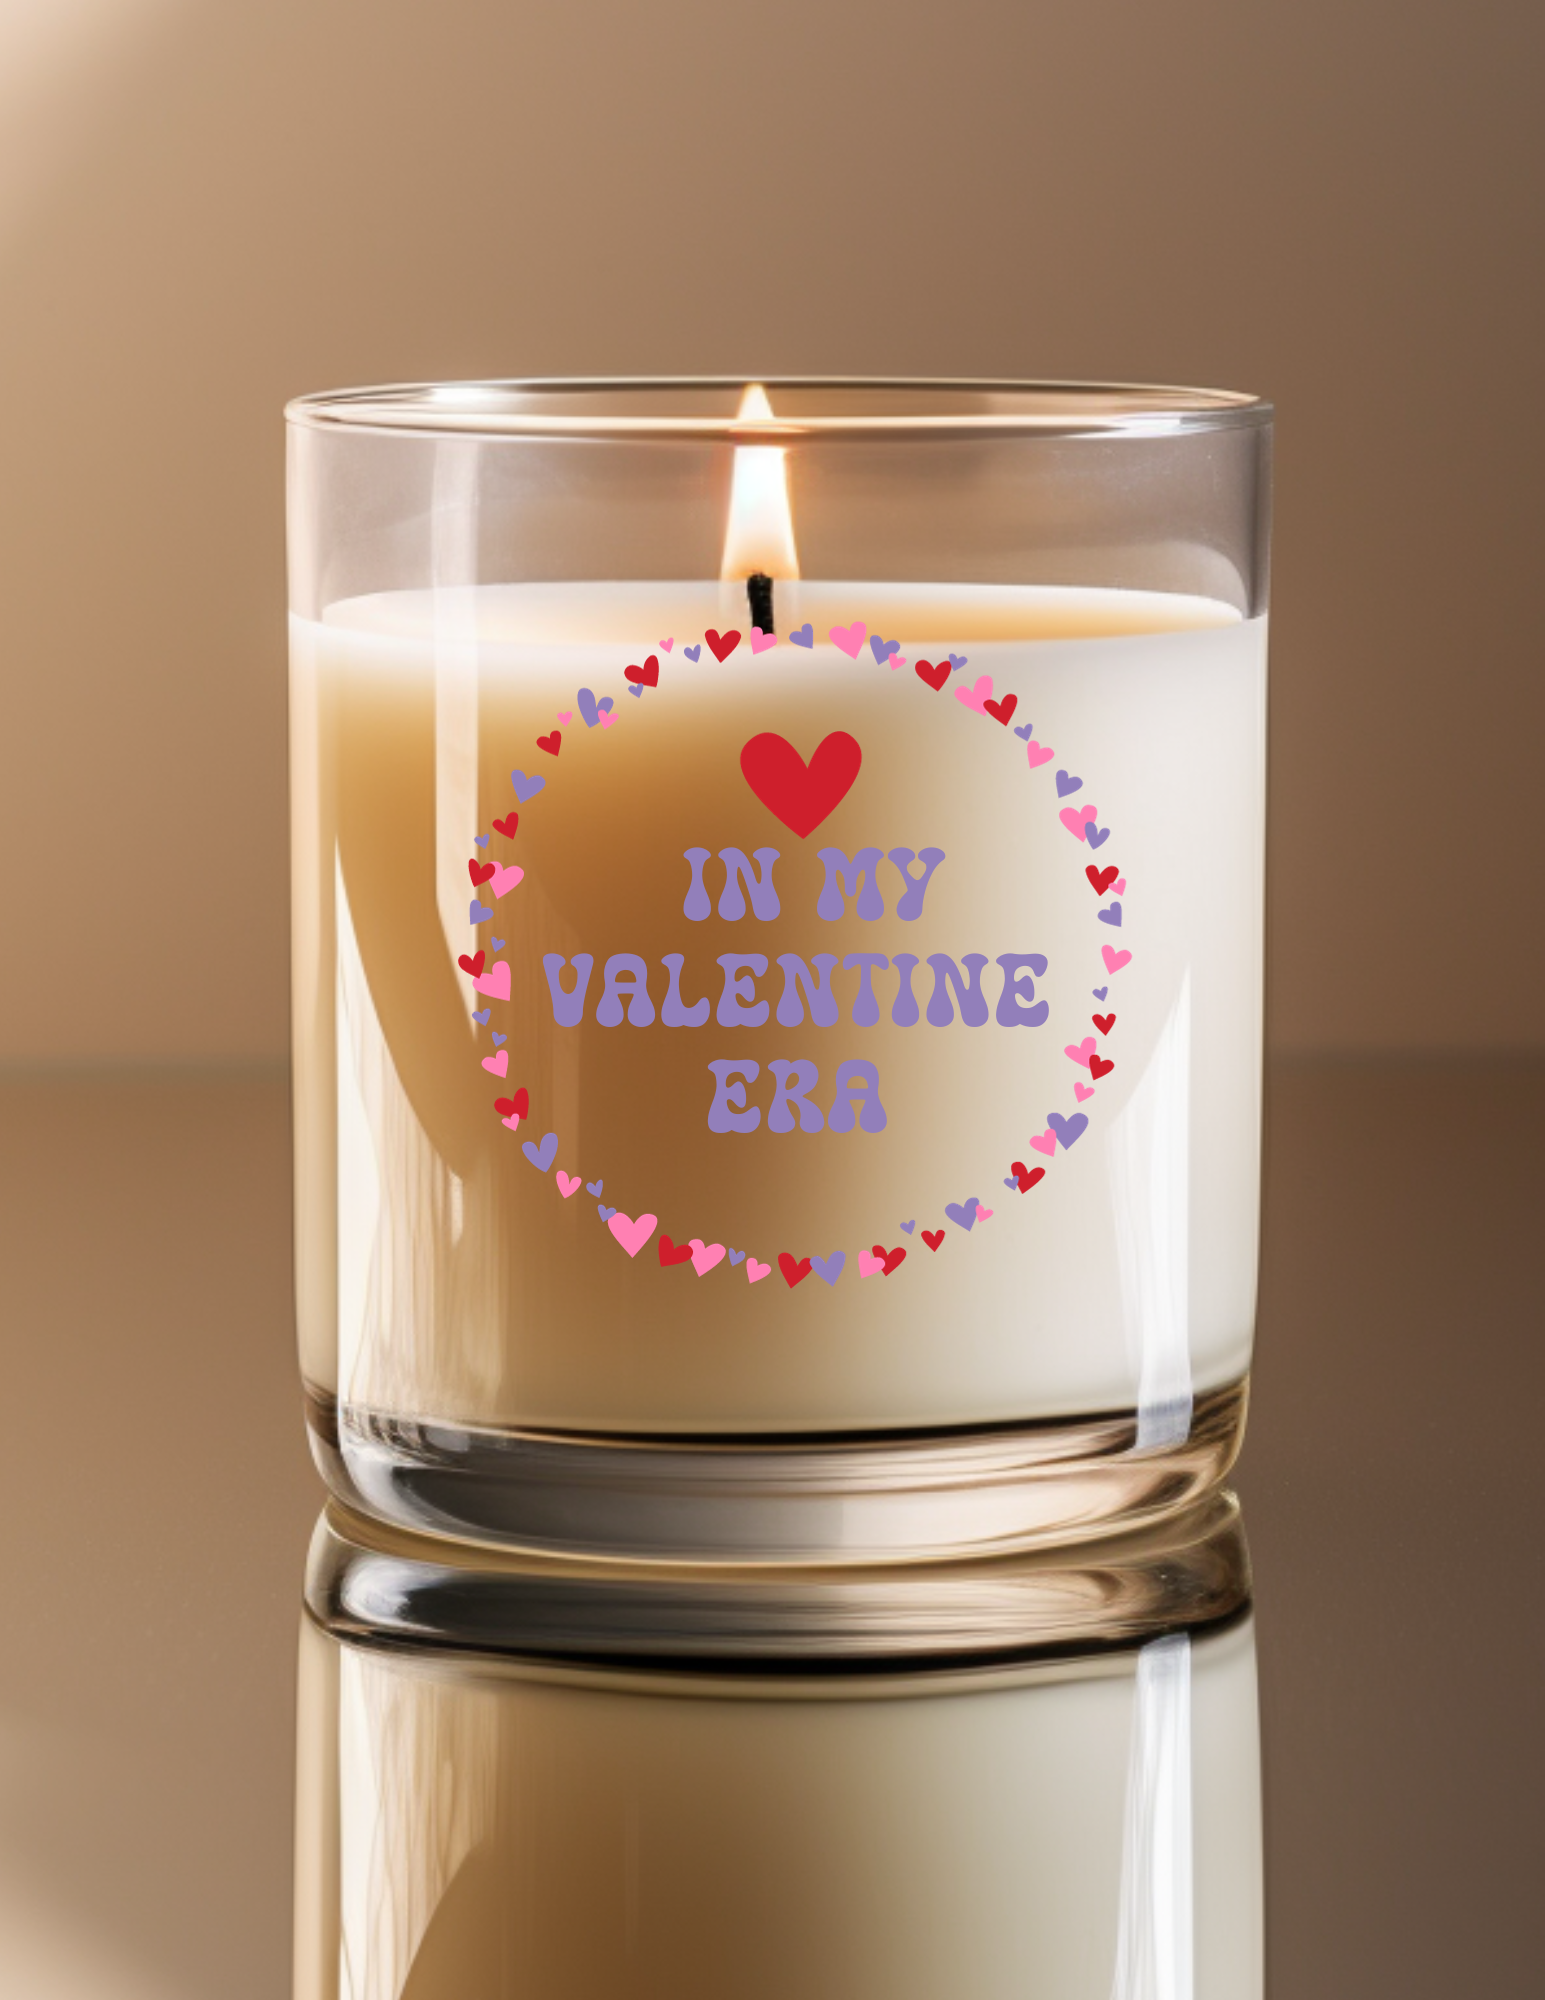 Simply In My Valentine Era Candle